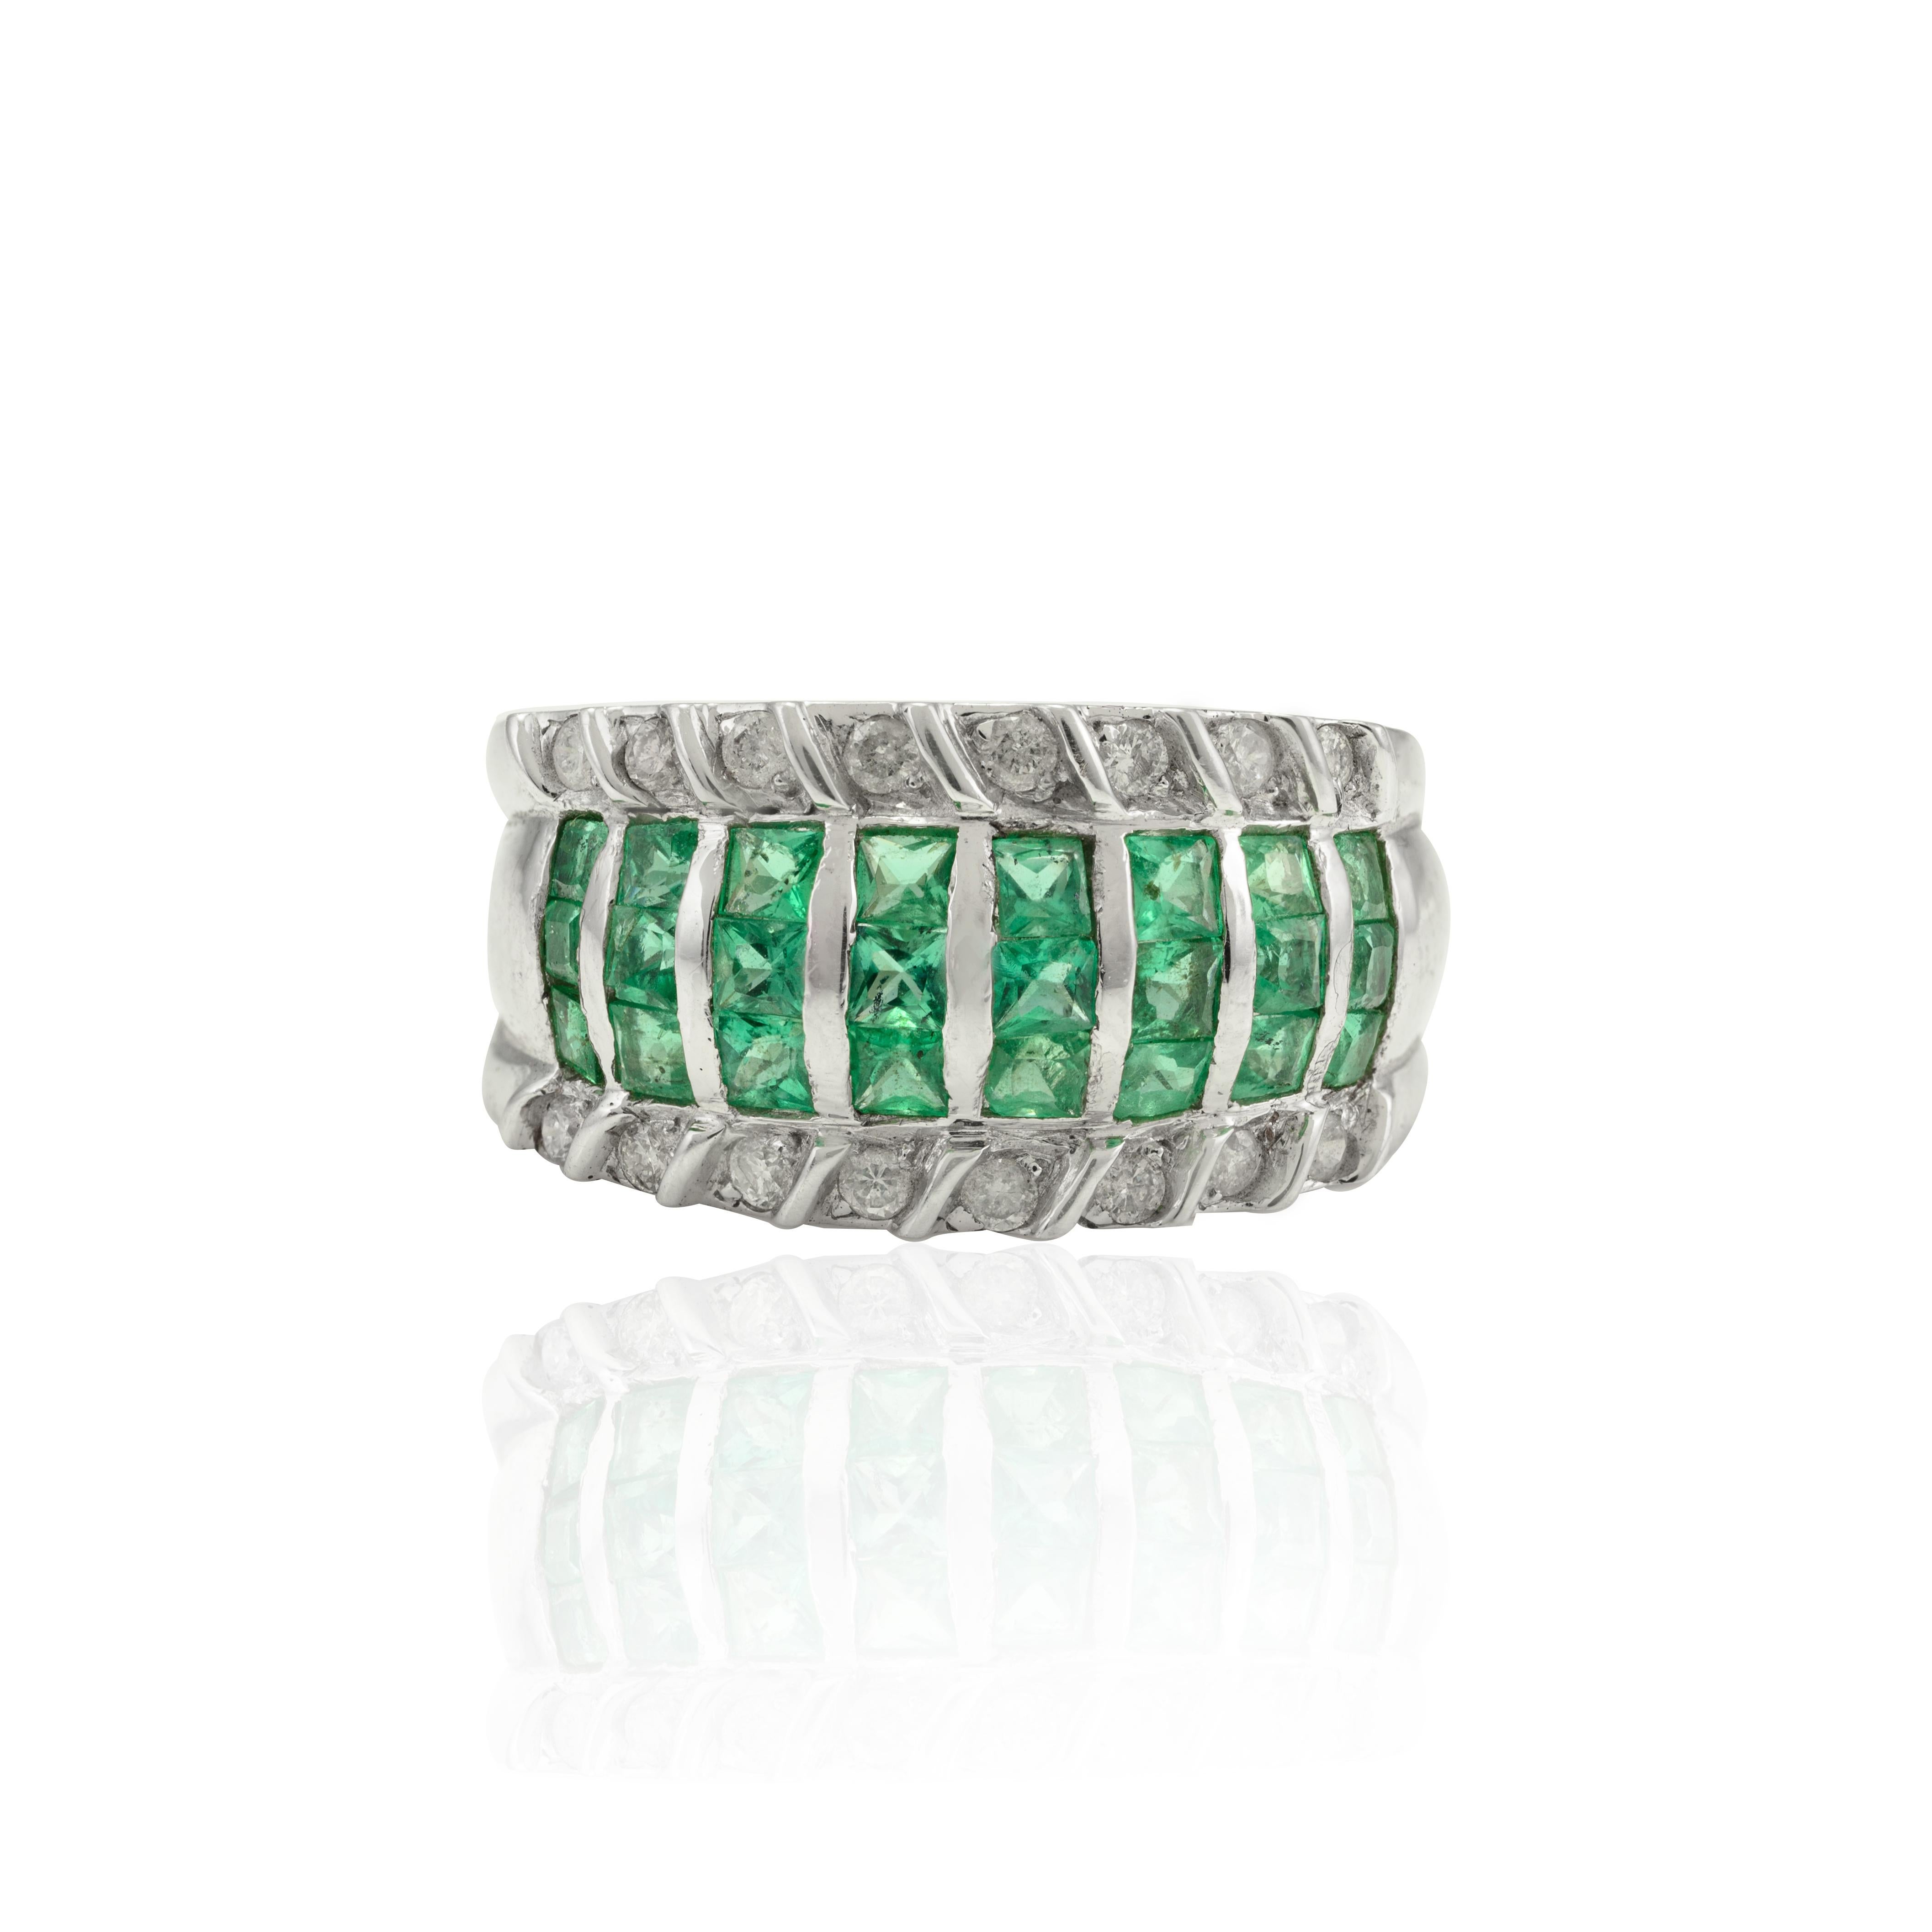 For Sale:  18k Solid White Gold 1 Carat Natural Emerald and Diamond Bombe Ring 6